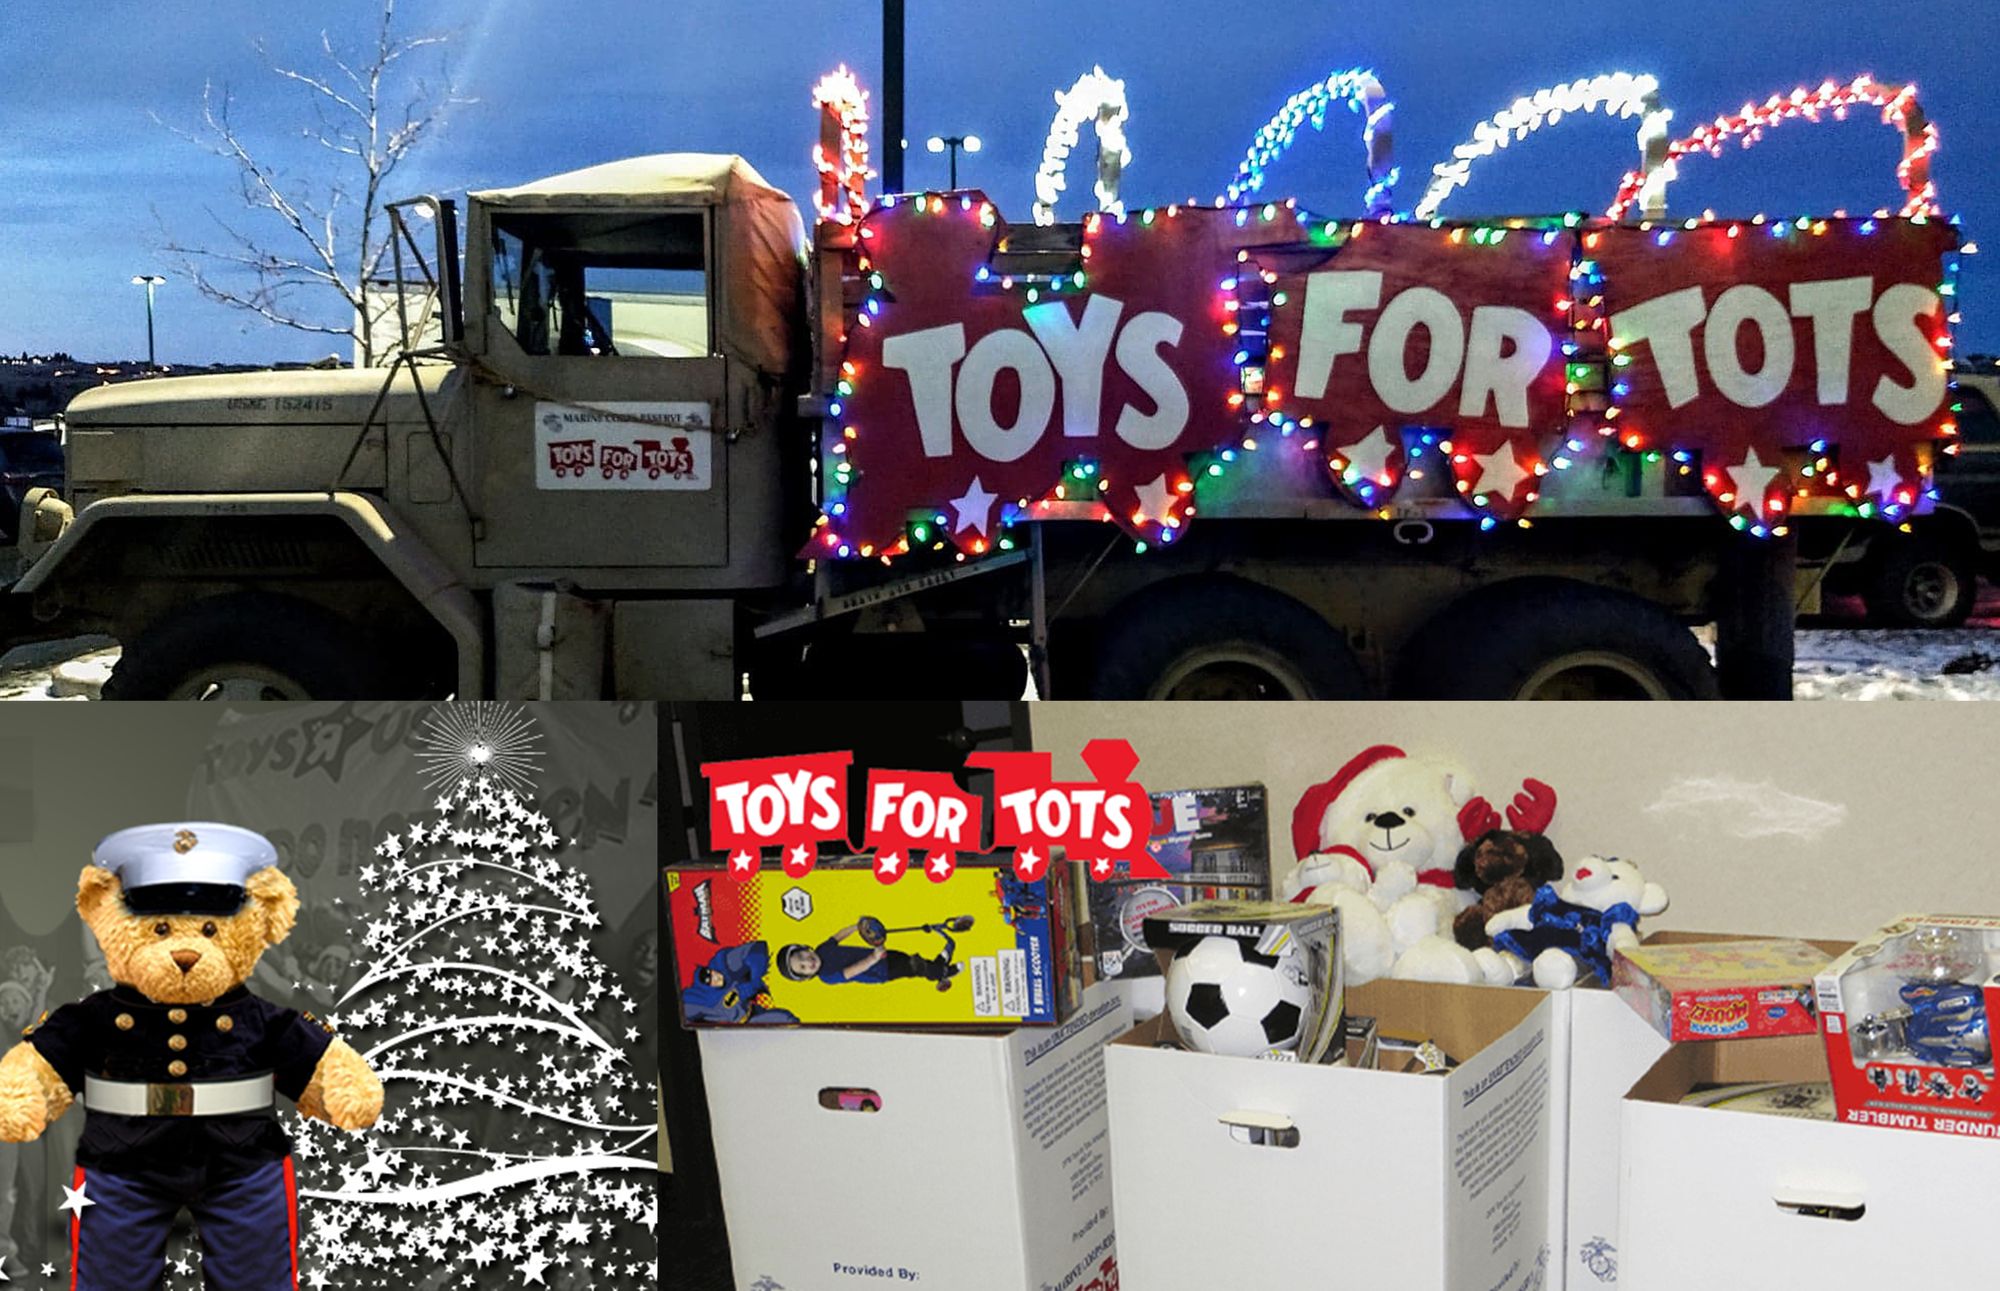 Help Make Christmas Merrier By Donating To The Toys For Tots Program